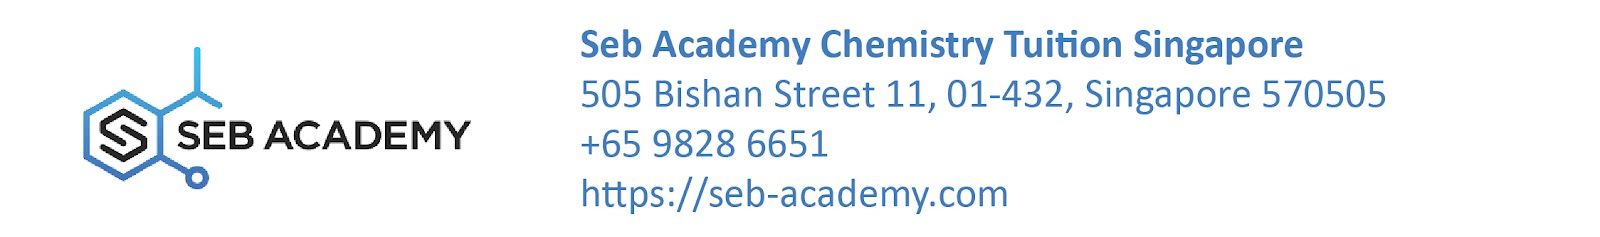 https://chemistry-tuition-1.blogspot.com/p/chemistry-tuition.html